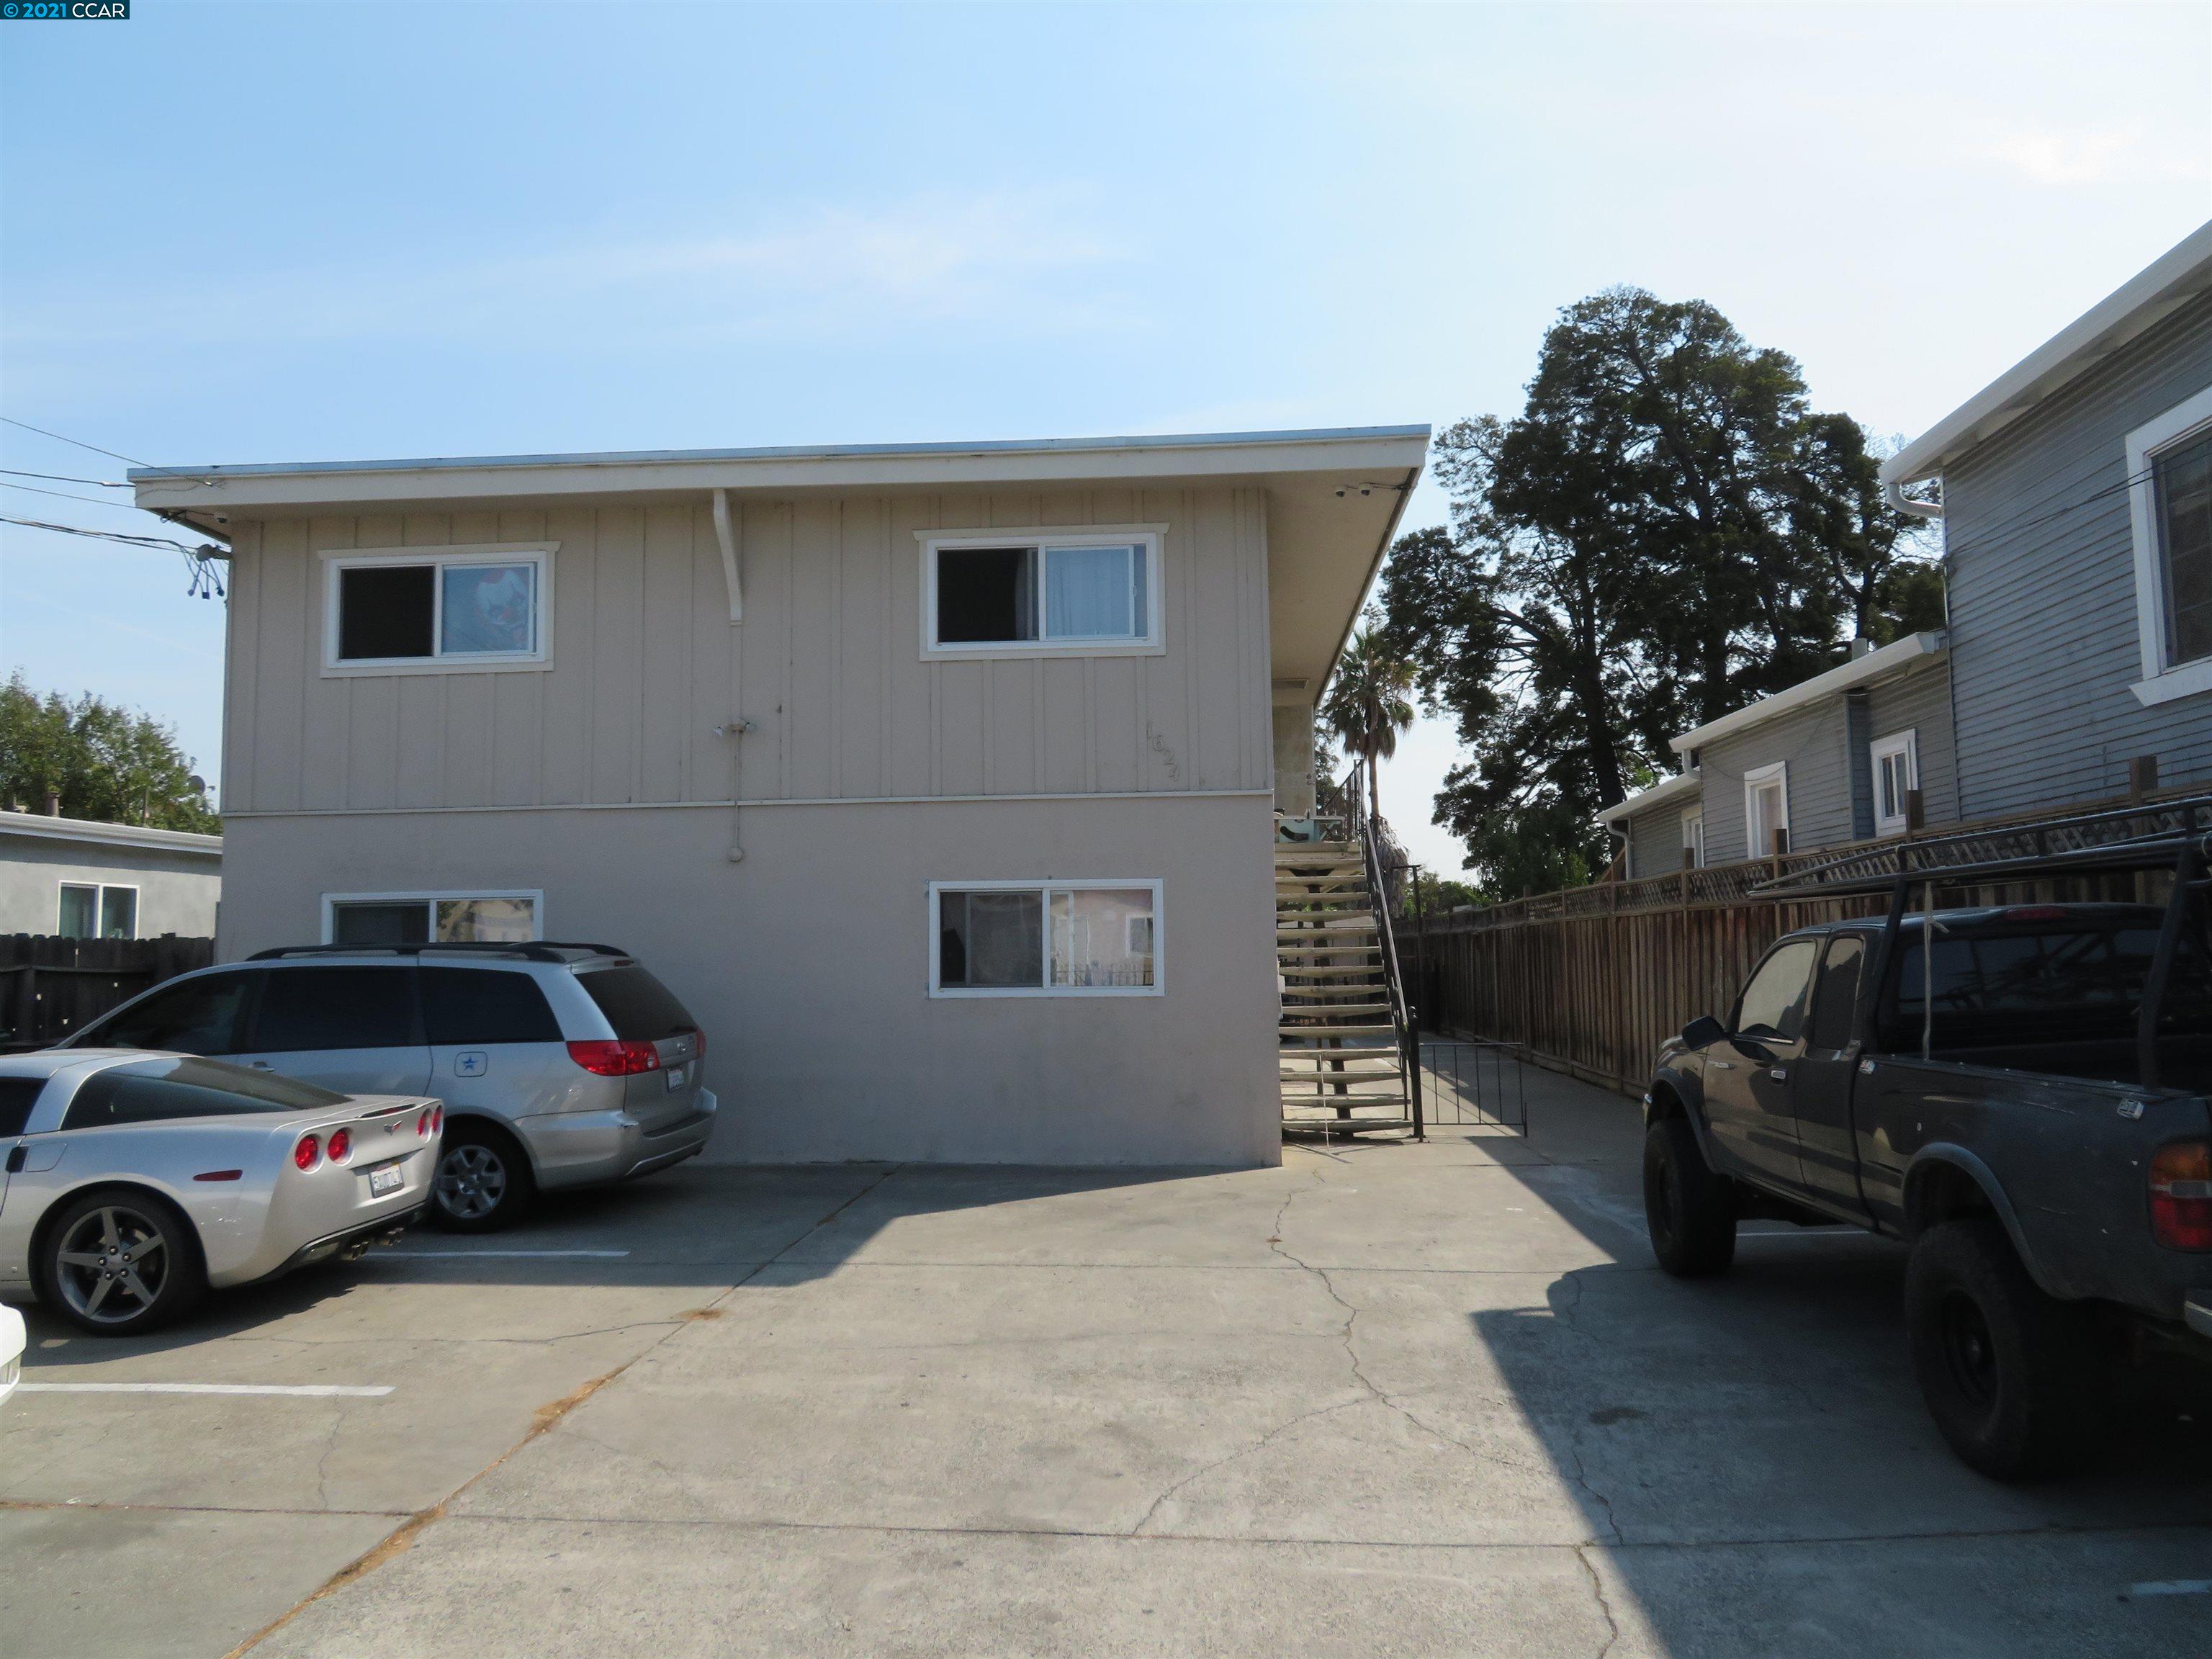 Photo of 1624 96th Ave in Oakland, CA